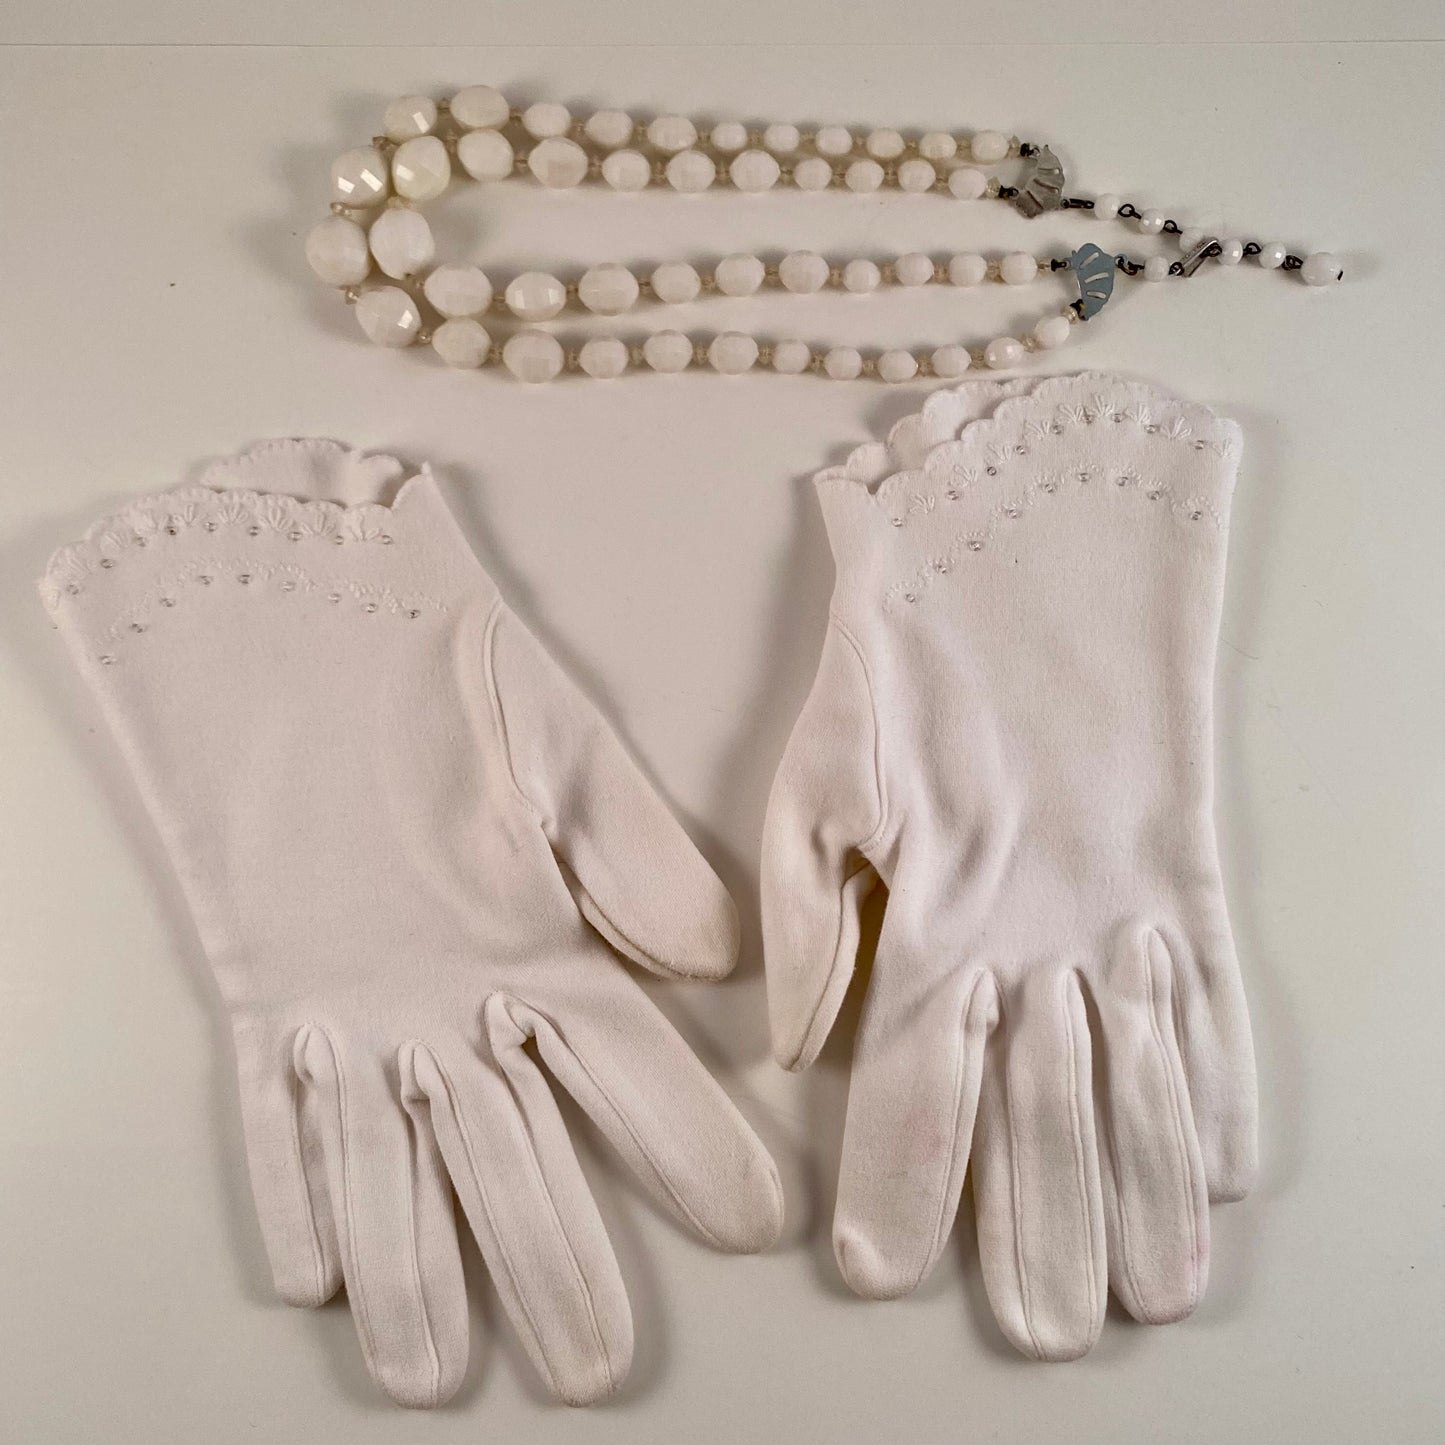 Classic Kandy From Retro Kandy Collection, With Vintage Necklace, Vintage Gloves & Original Artwork